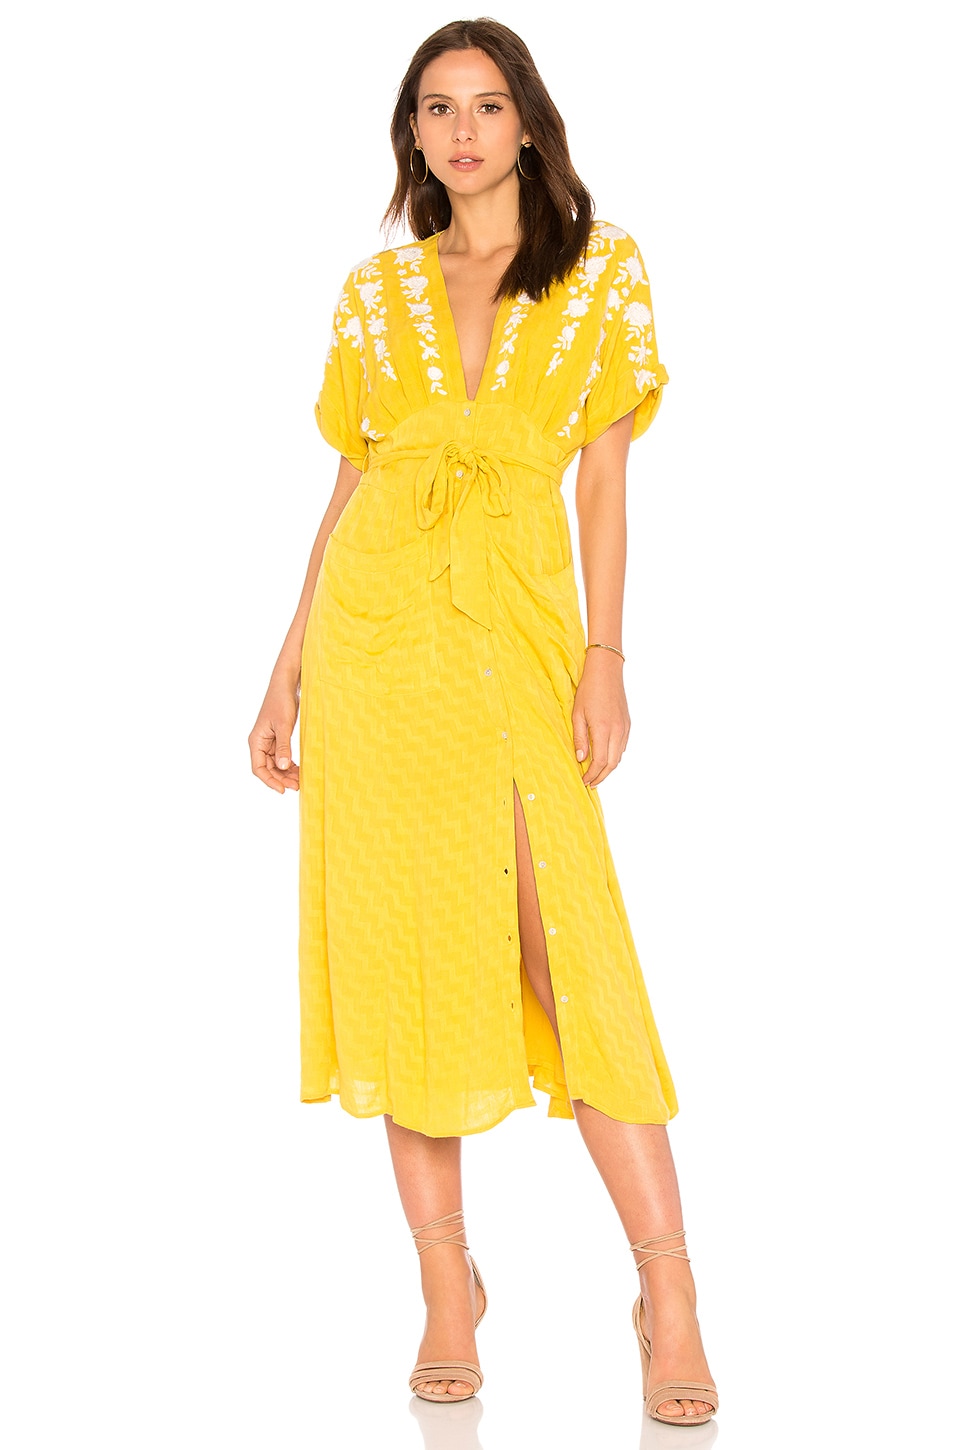 Free People Love To Love You Dress in Yellow | REVOLVE